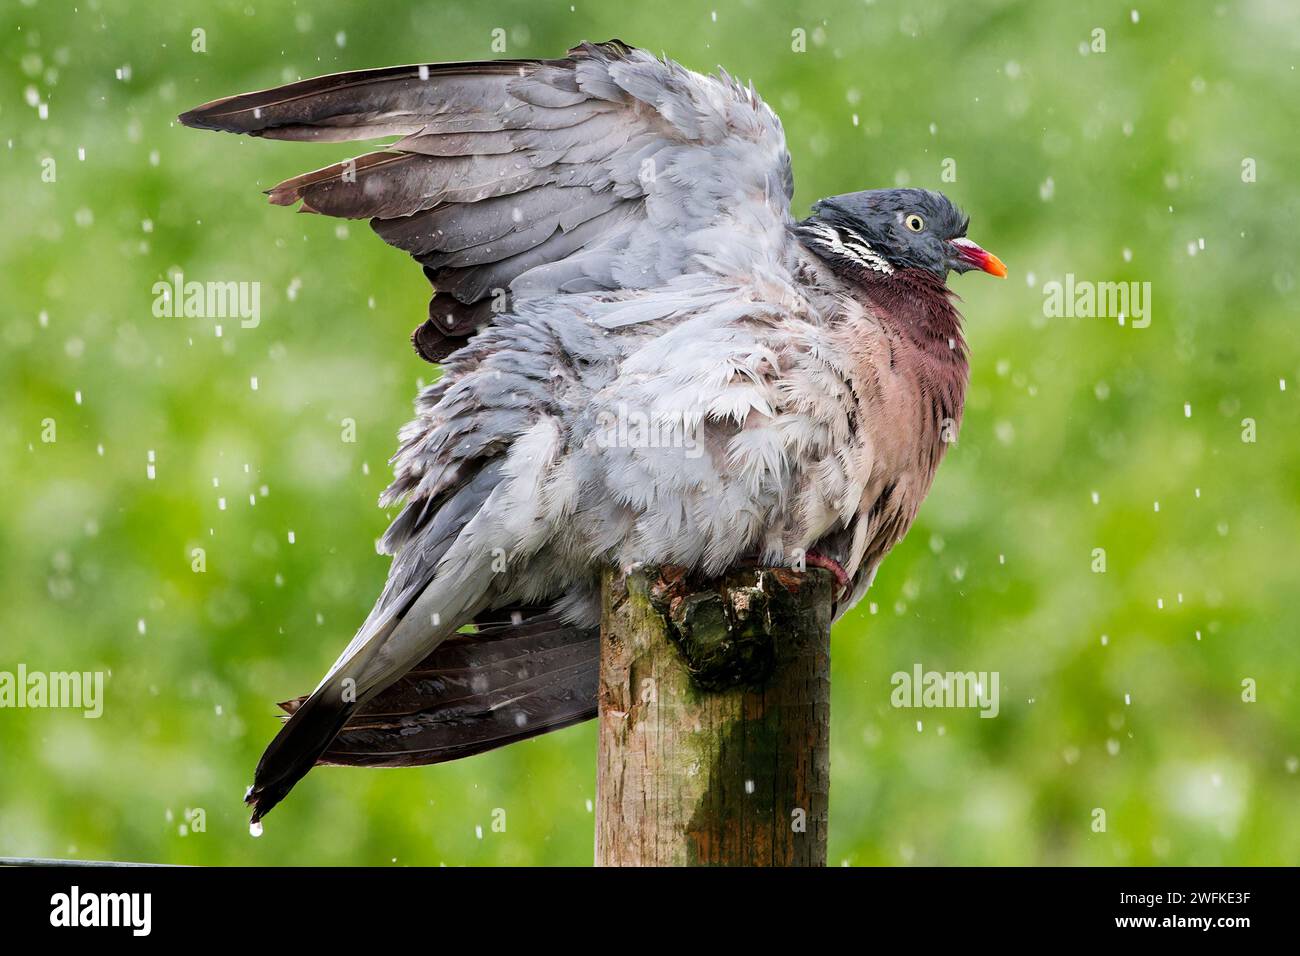 Wood pigeon taking a shower during heavy rain Stock Photo